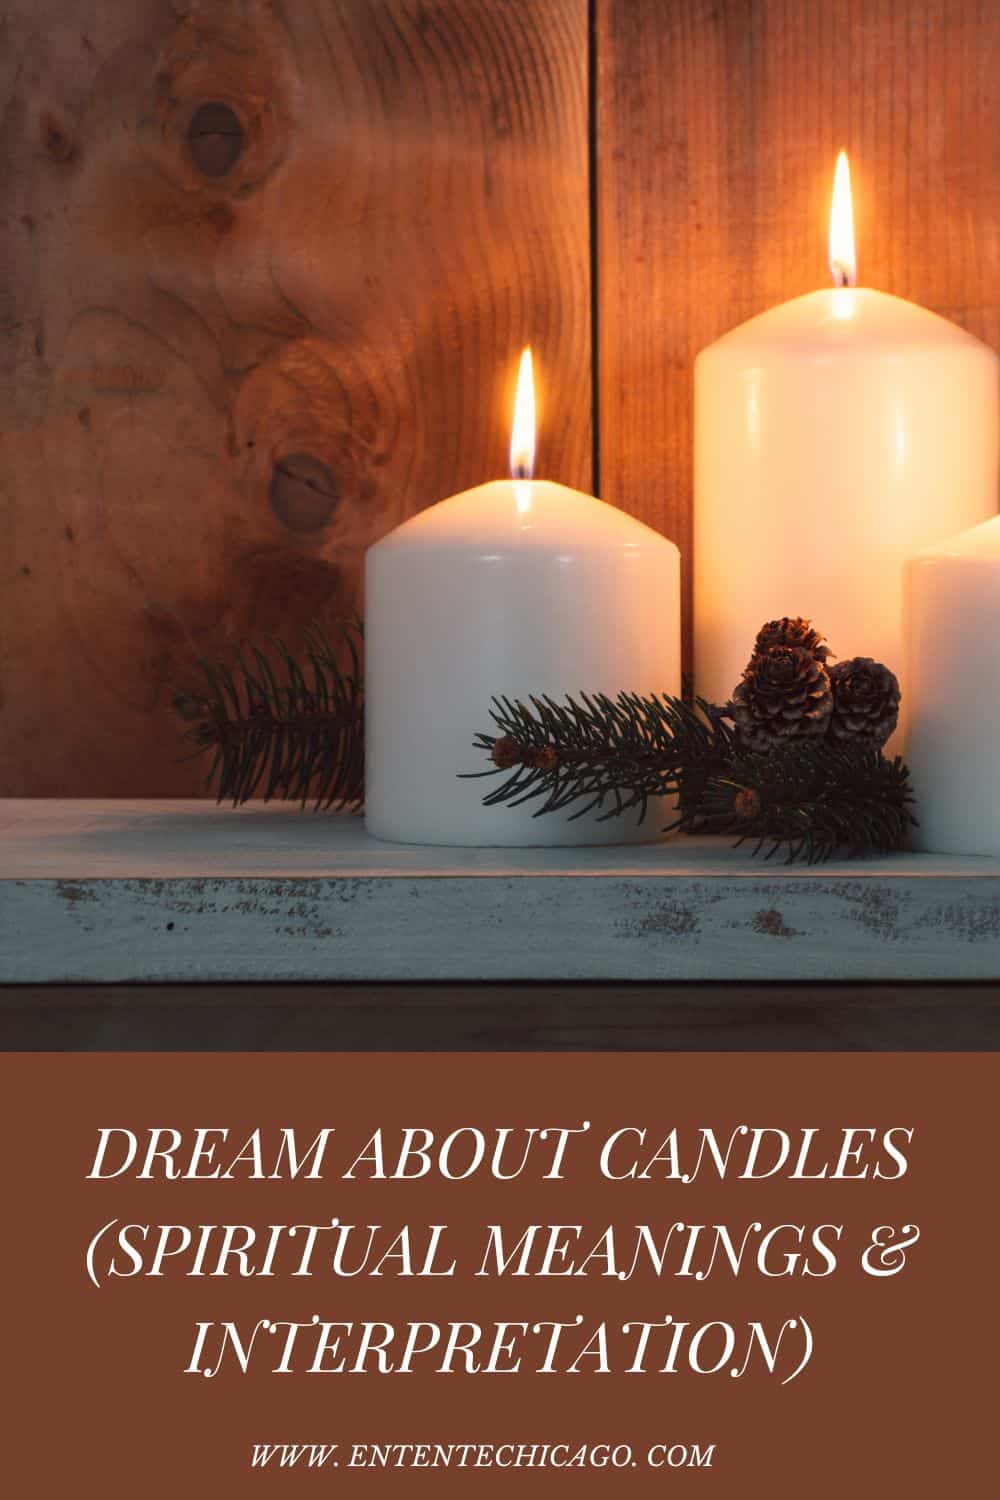 Dream About Candles (Spiritual Meanings & Interpretation)